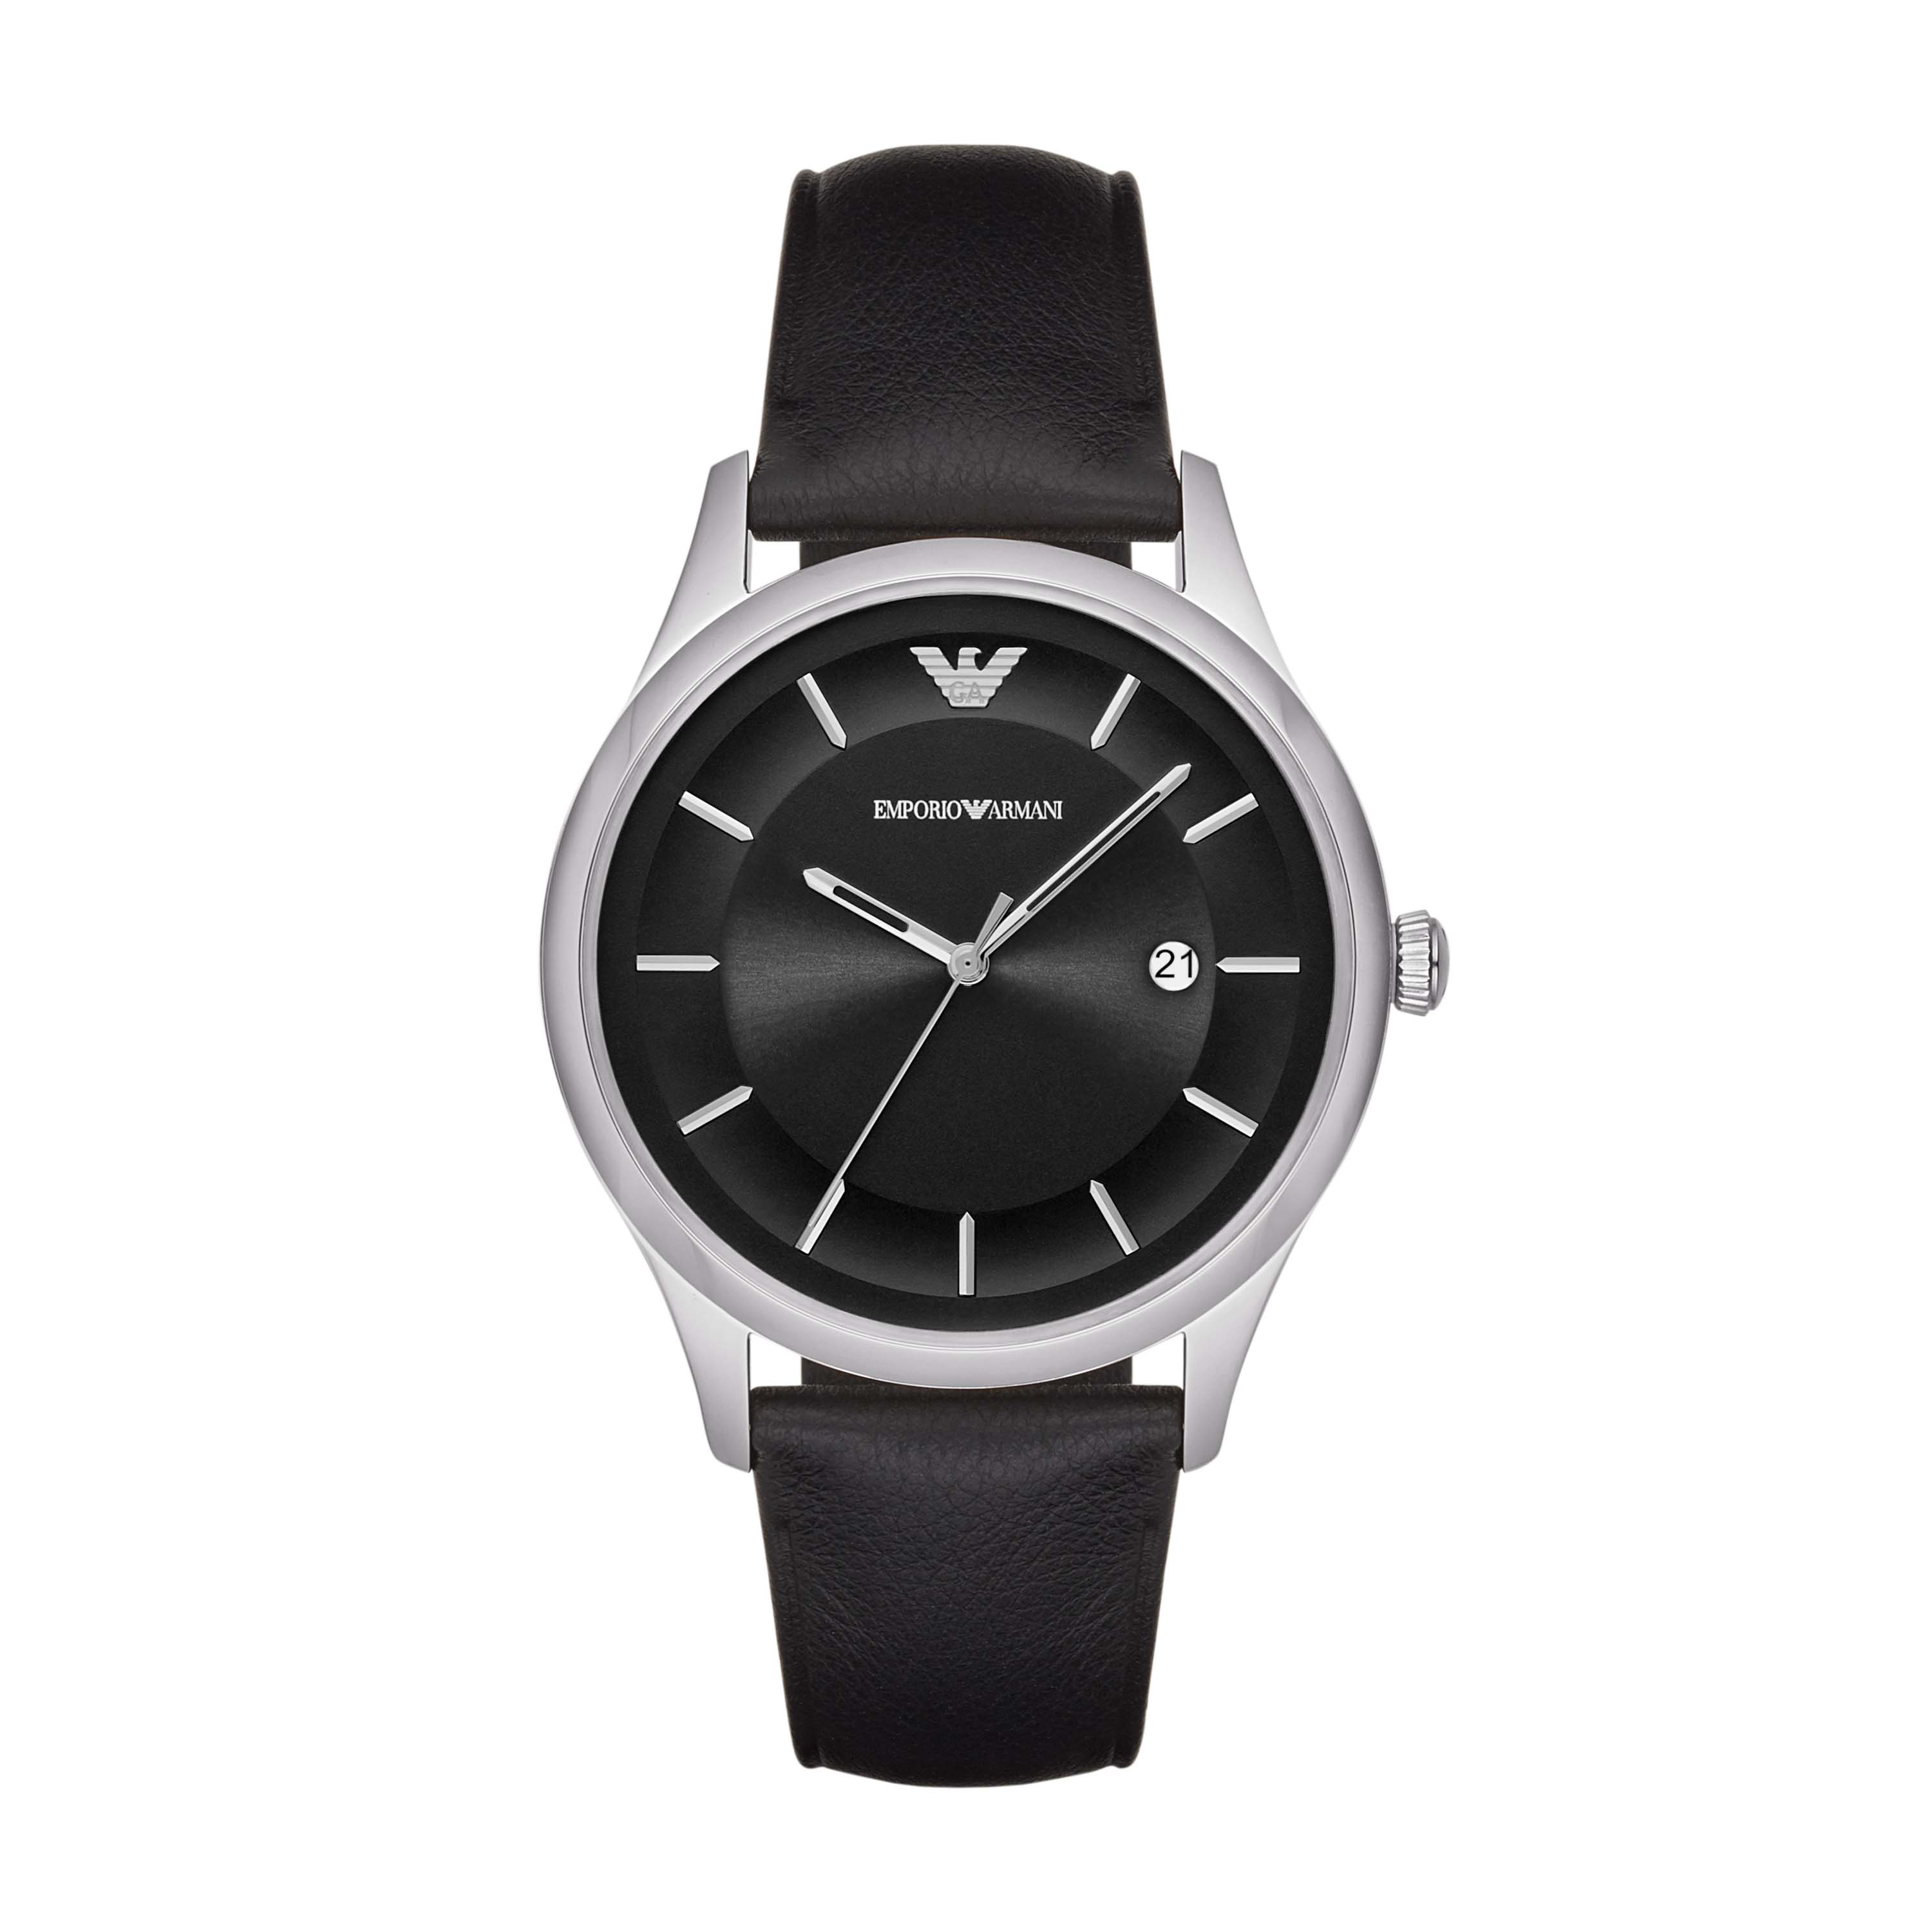 EMPORIO ARMANI LG RD BLK BLK STP – The Watch House